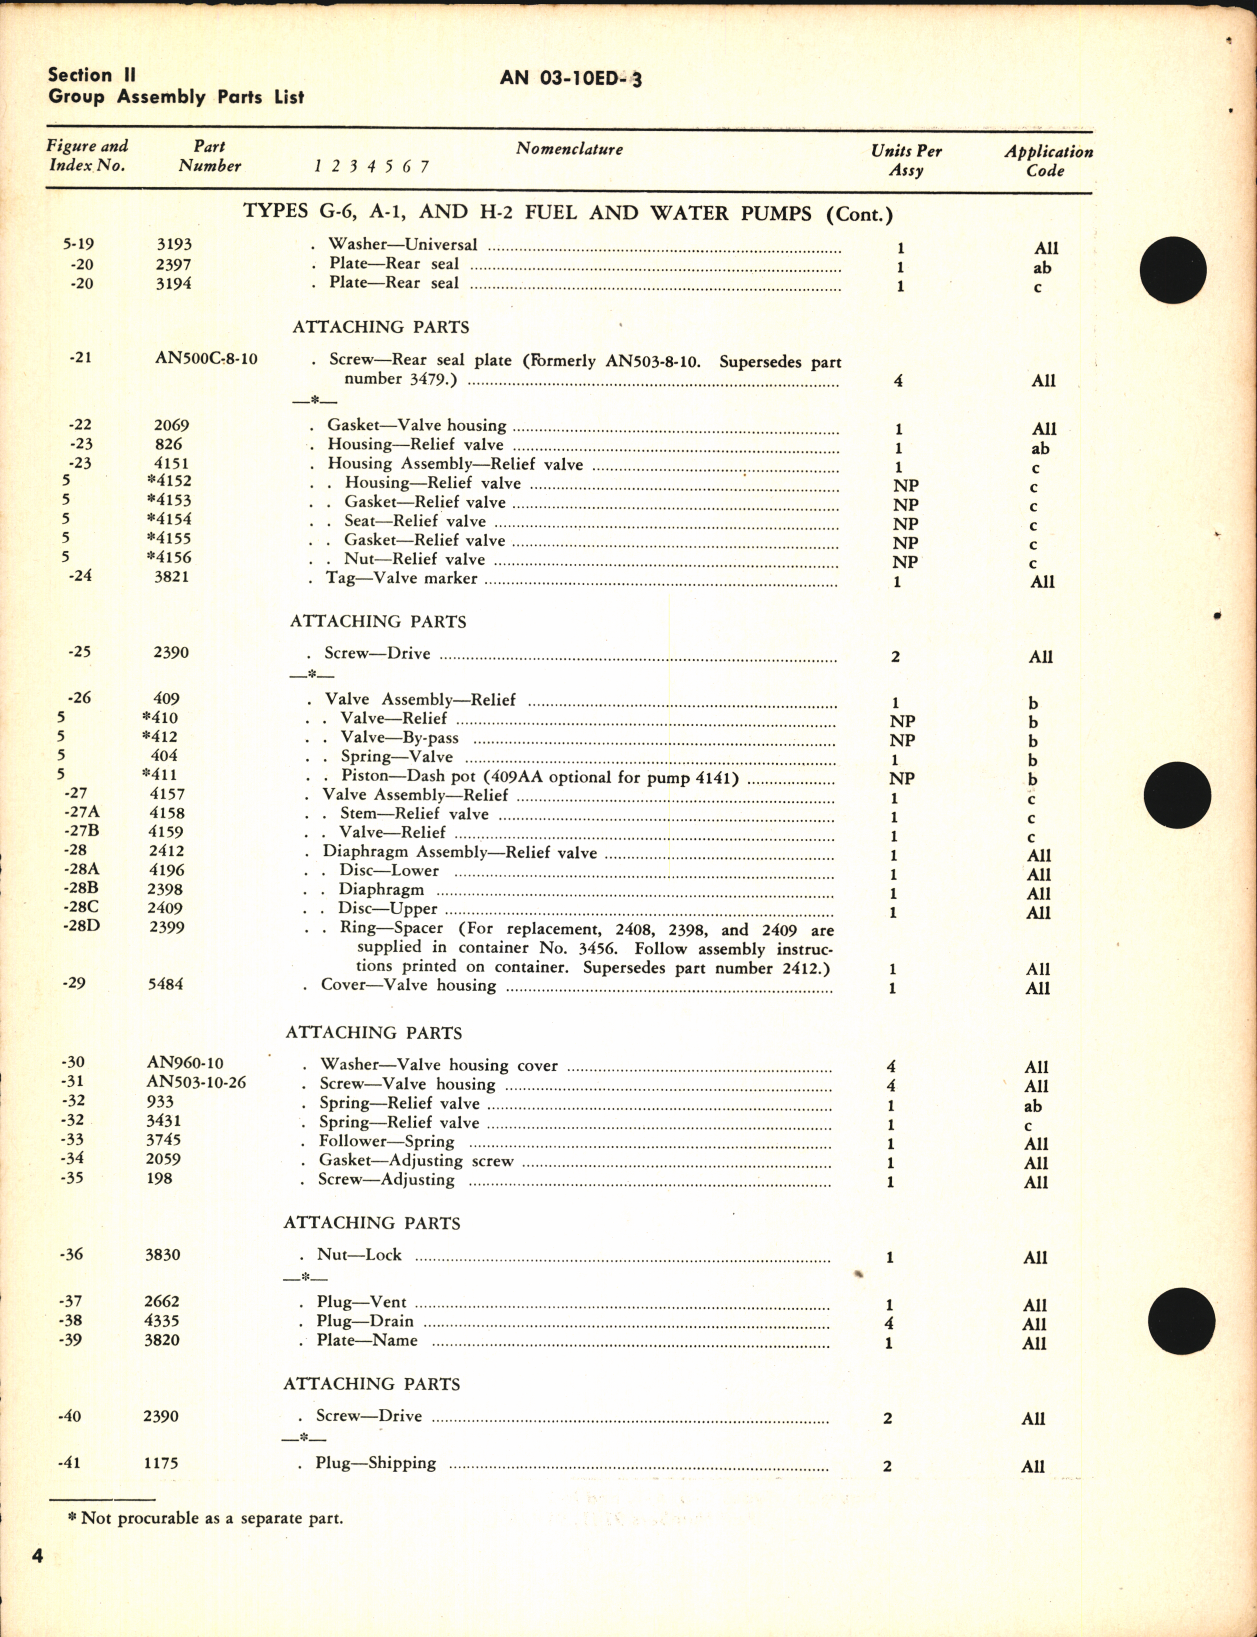 Sample page 8 from AirCorps Library document: Parts Catalog for Fuel and Water Pumps